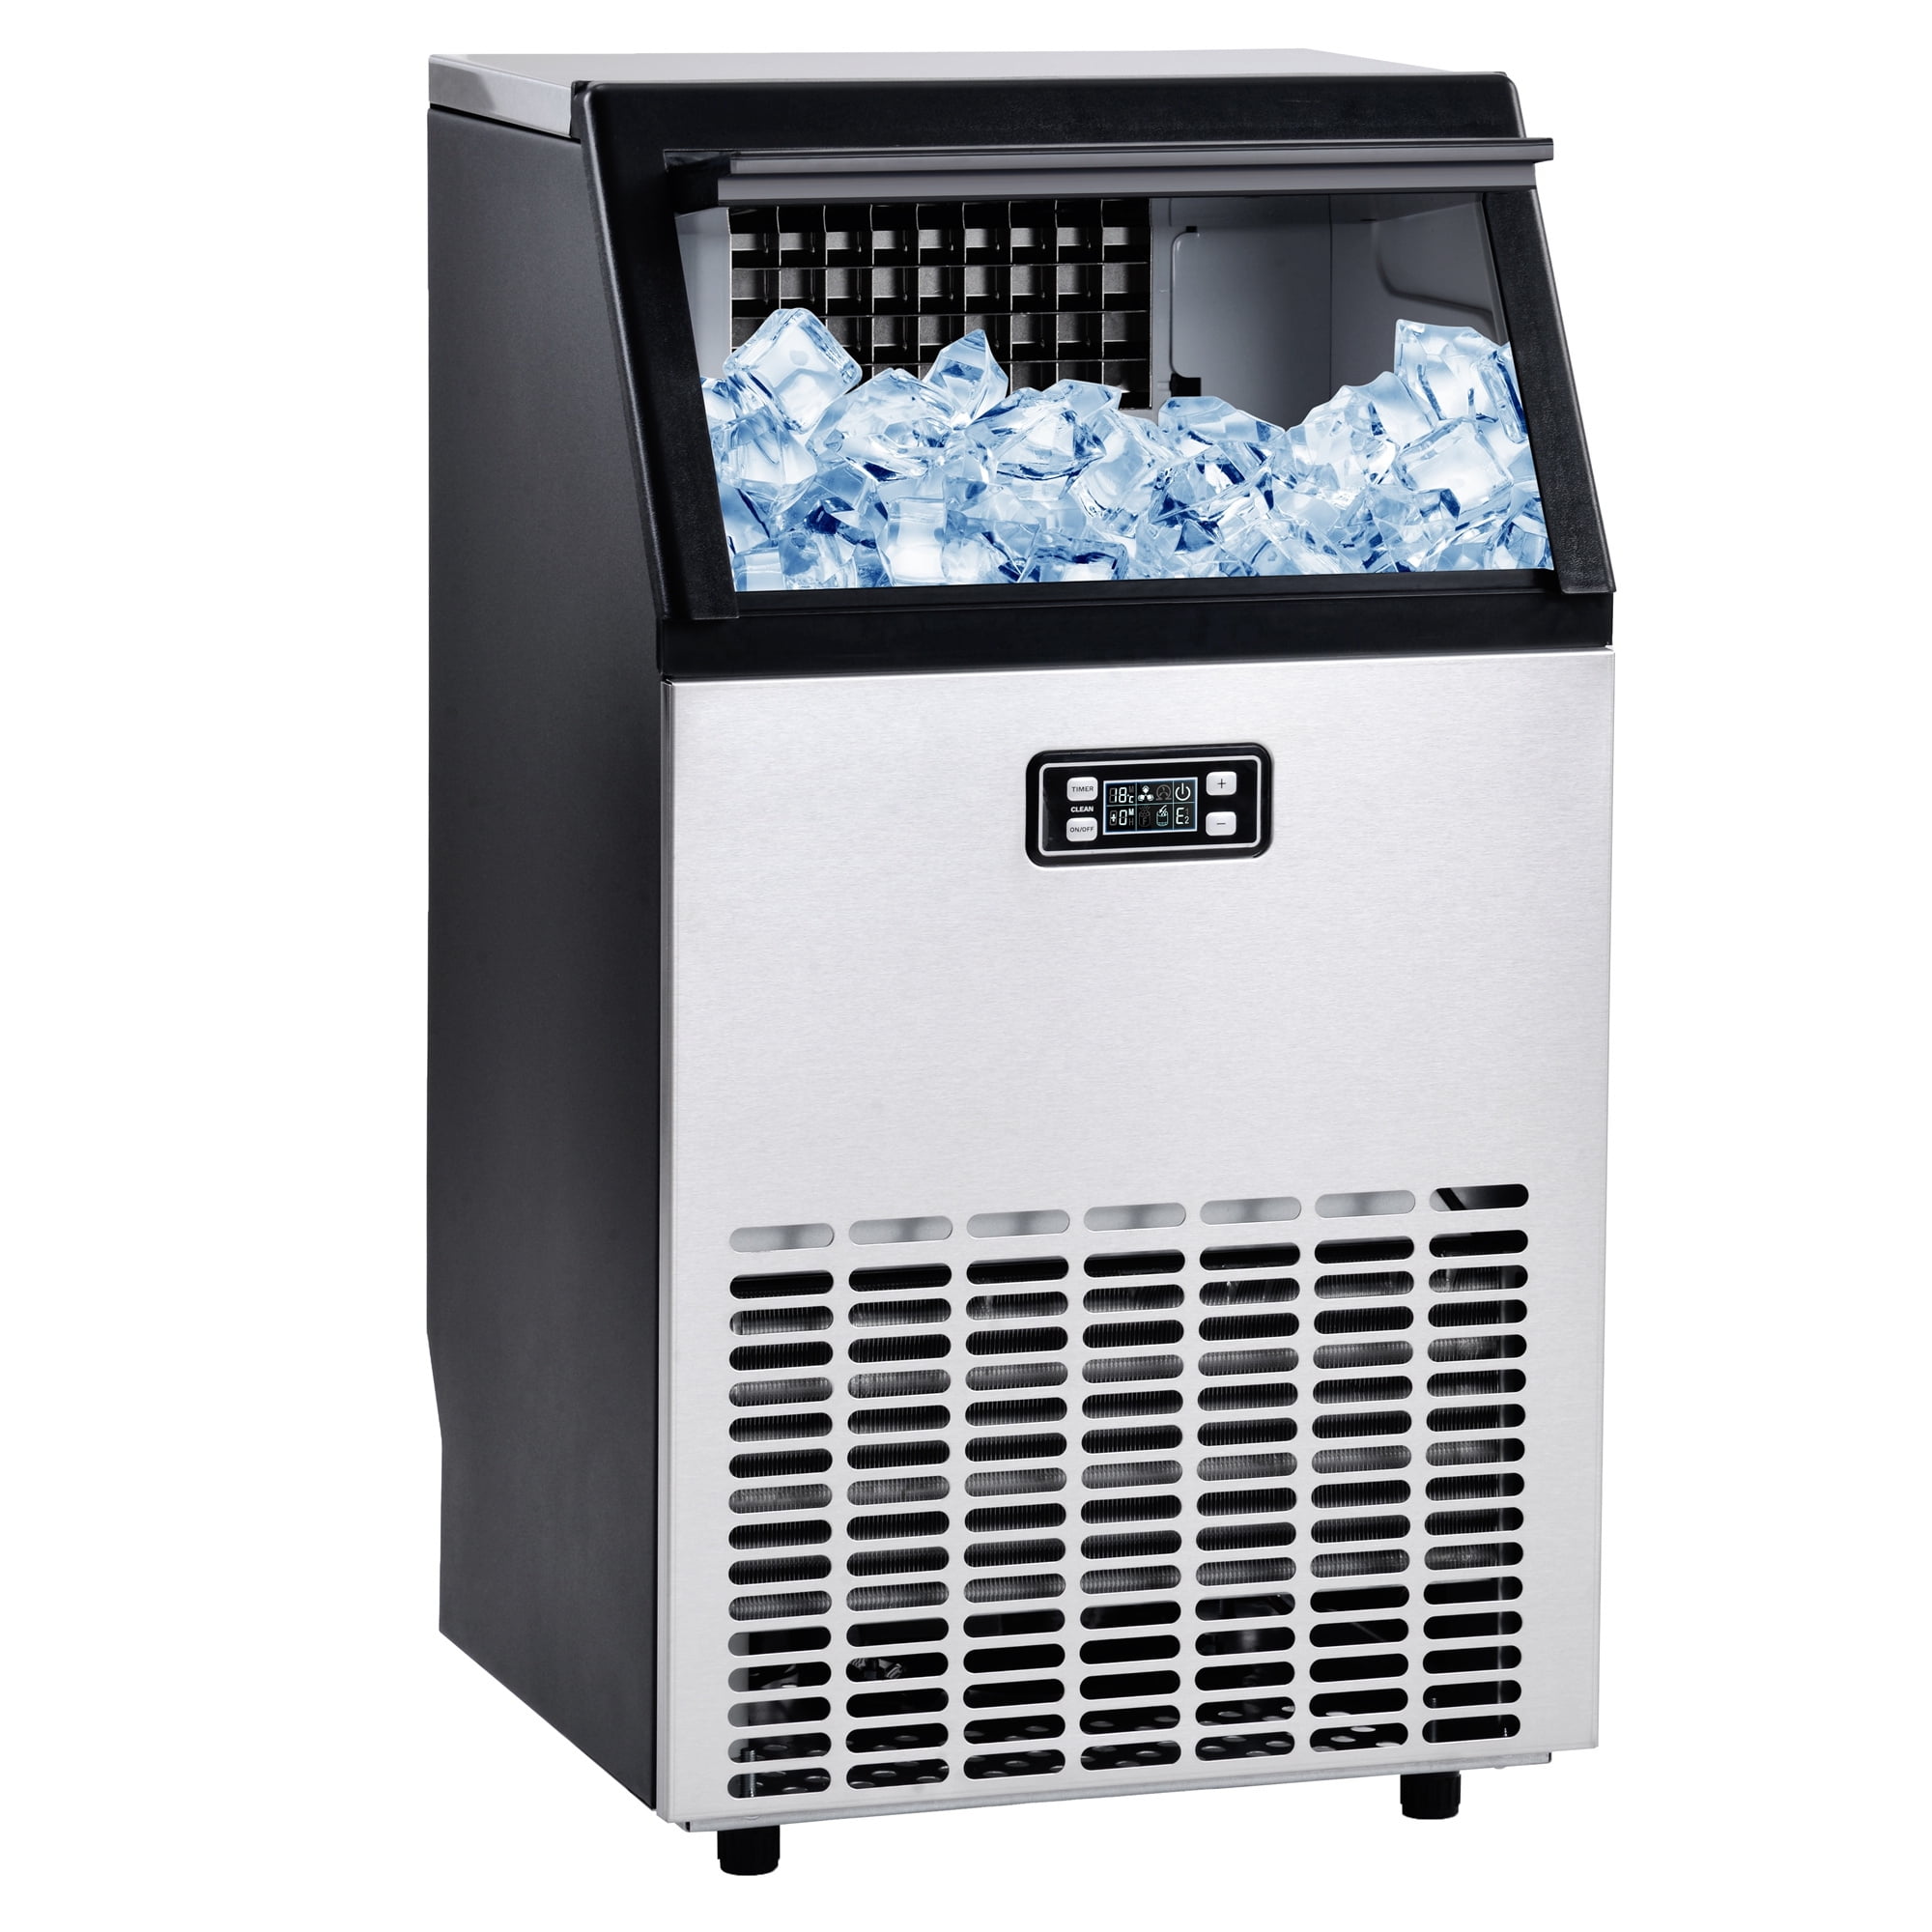 VBENLEM Commercial Ice Makers 90-100LBS/24H with Water Drain Pump 33LBS Storage Free-Standing Commercial Ice Machine 4x9 Ice Cubes LCD Display Auto Clean for Restaurant Bar & Coffee Shop 